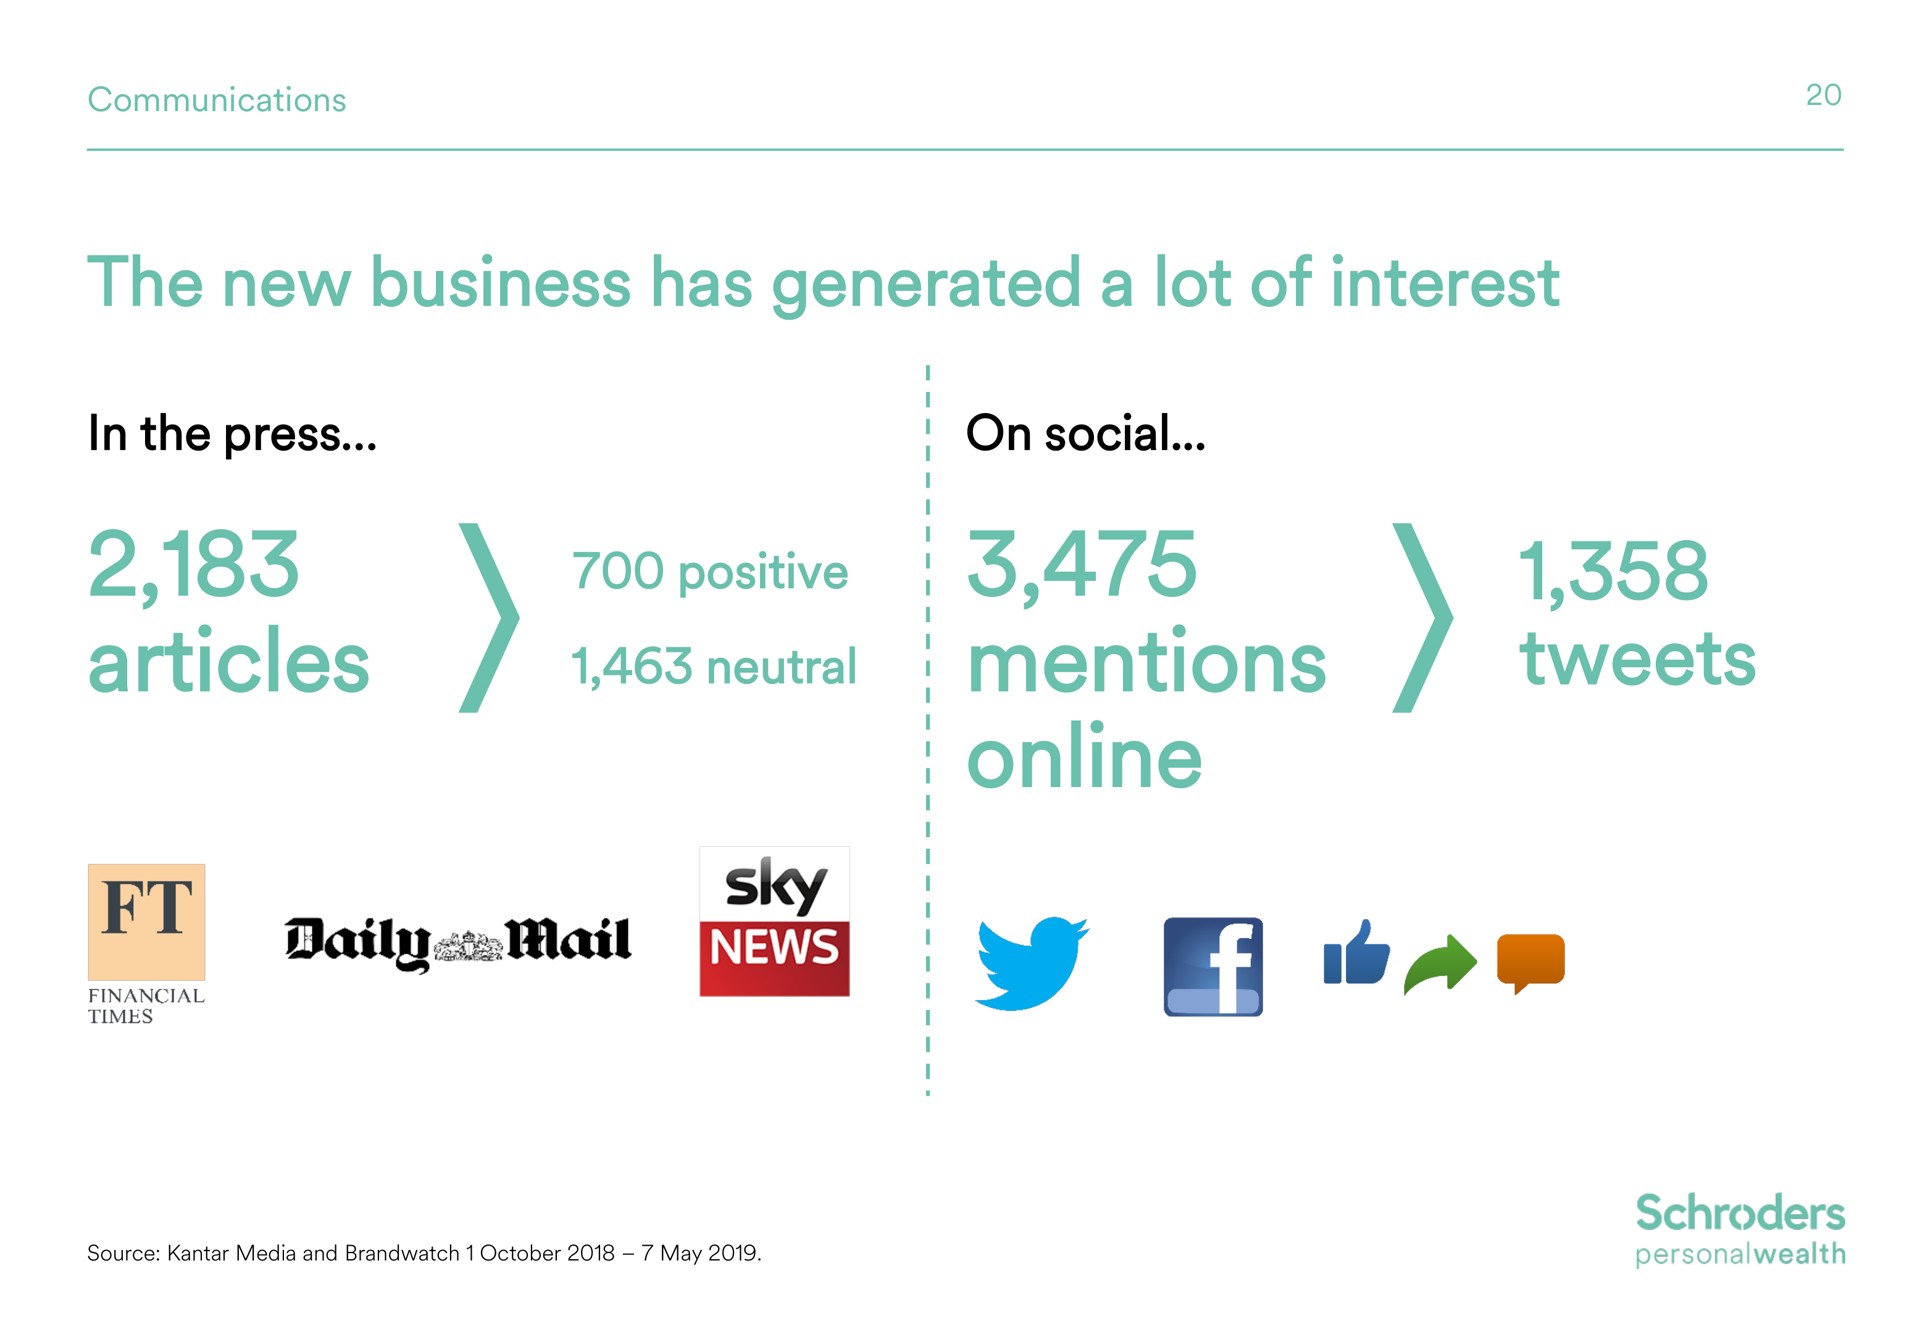 the new business has generated a lot of interest articles mentions tweets neutral daily mail ree | Schroders